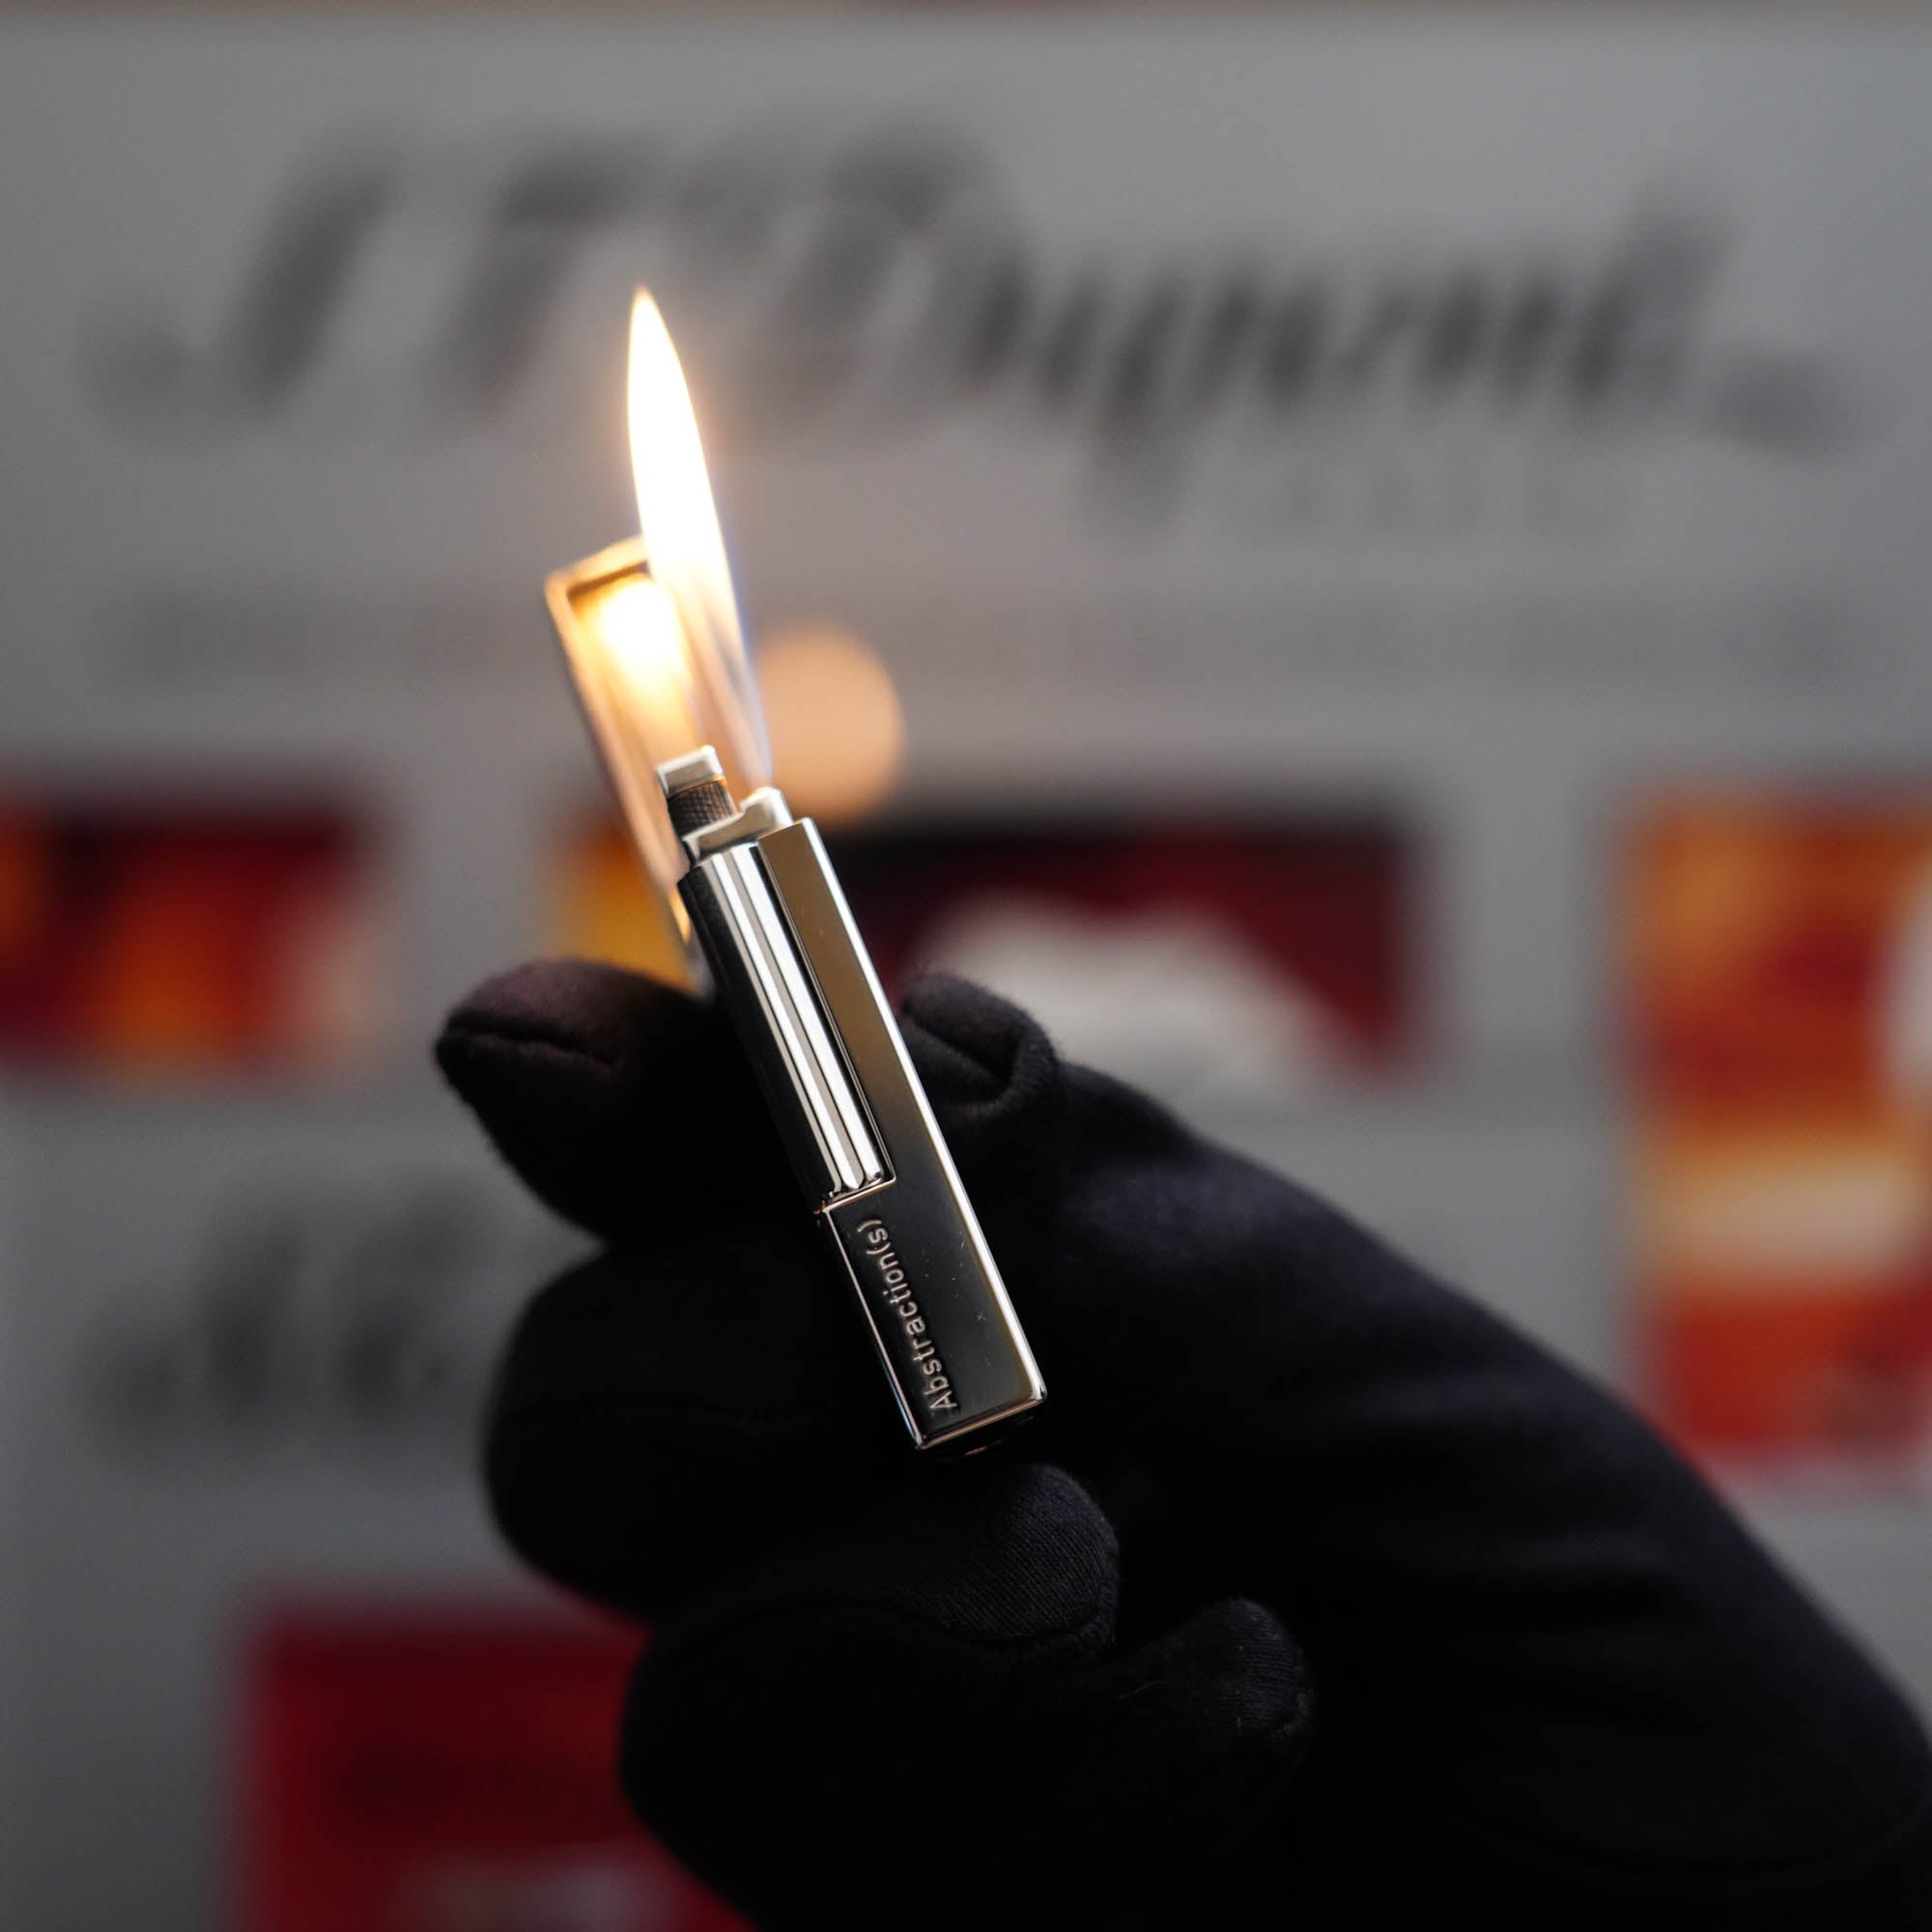 A vintage collector's item featuring a person holding a S.T. Dupont Ligne 2 Abstraction Black Laquer lighter in front of a box.